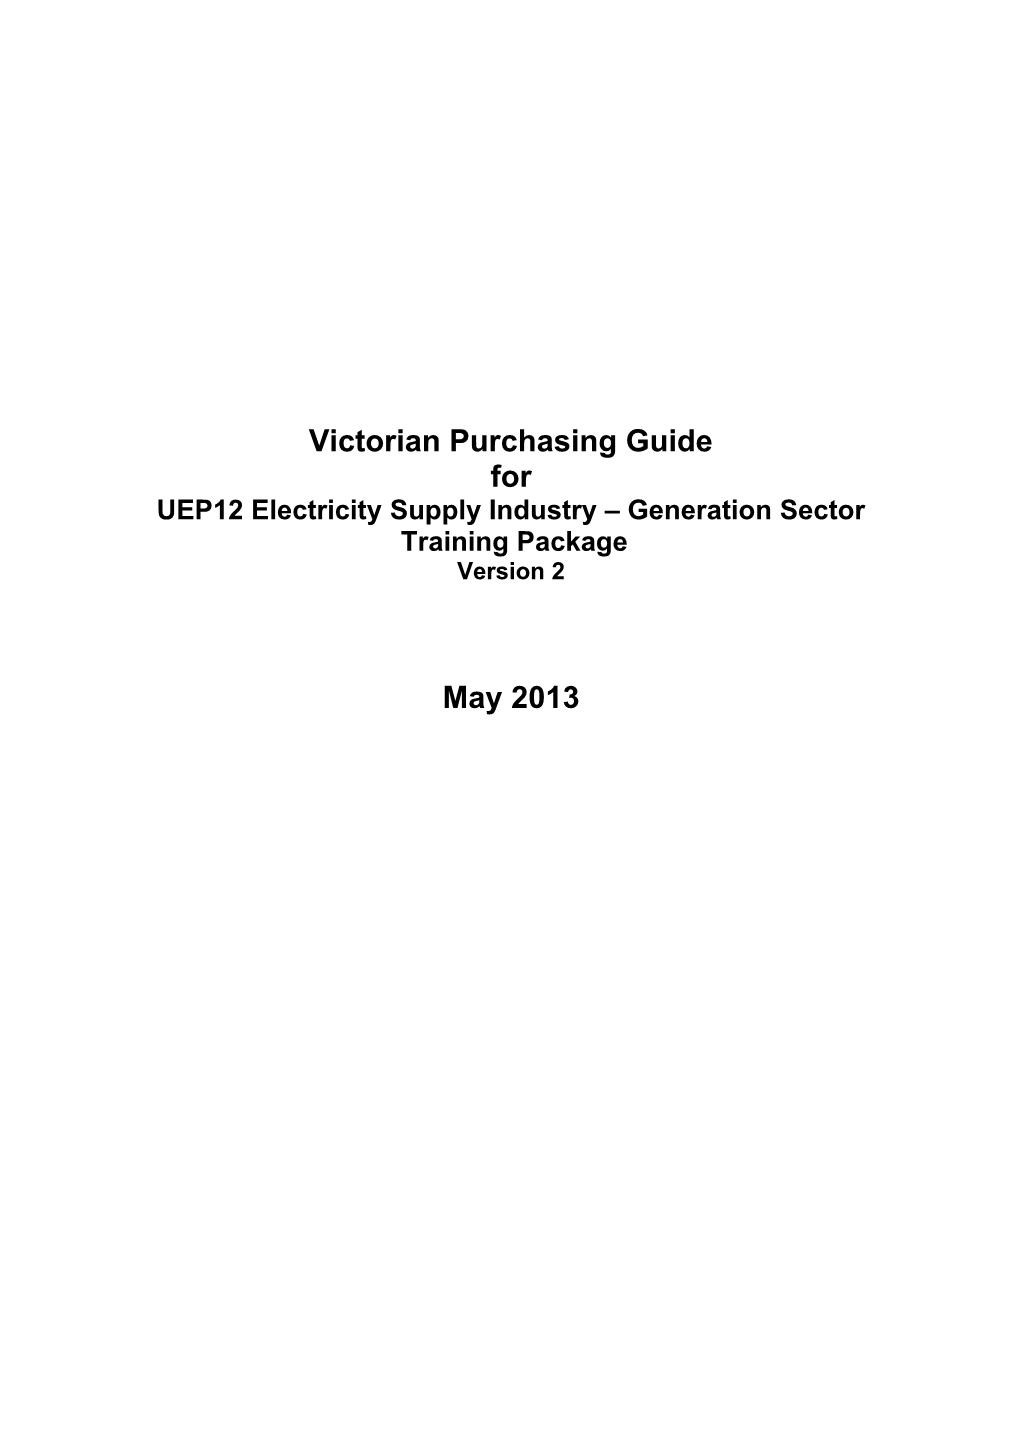 Victorian Purchasing Guide for UEP12 Electricity Supply Industry Generation Sector, Version 2